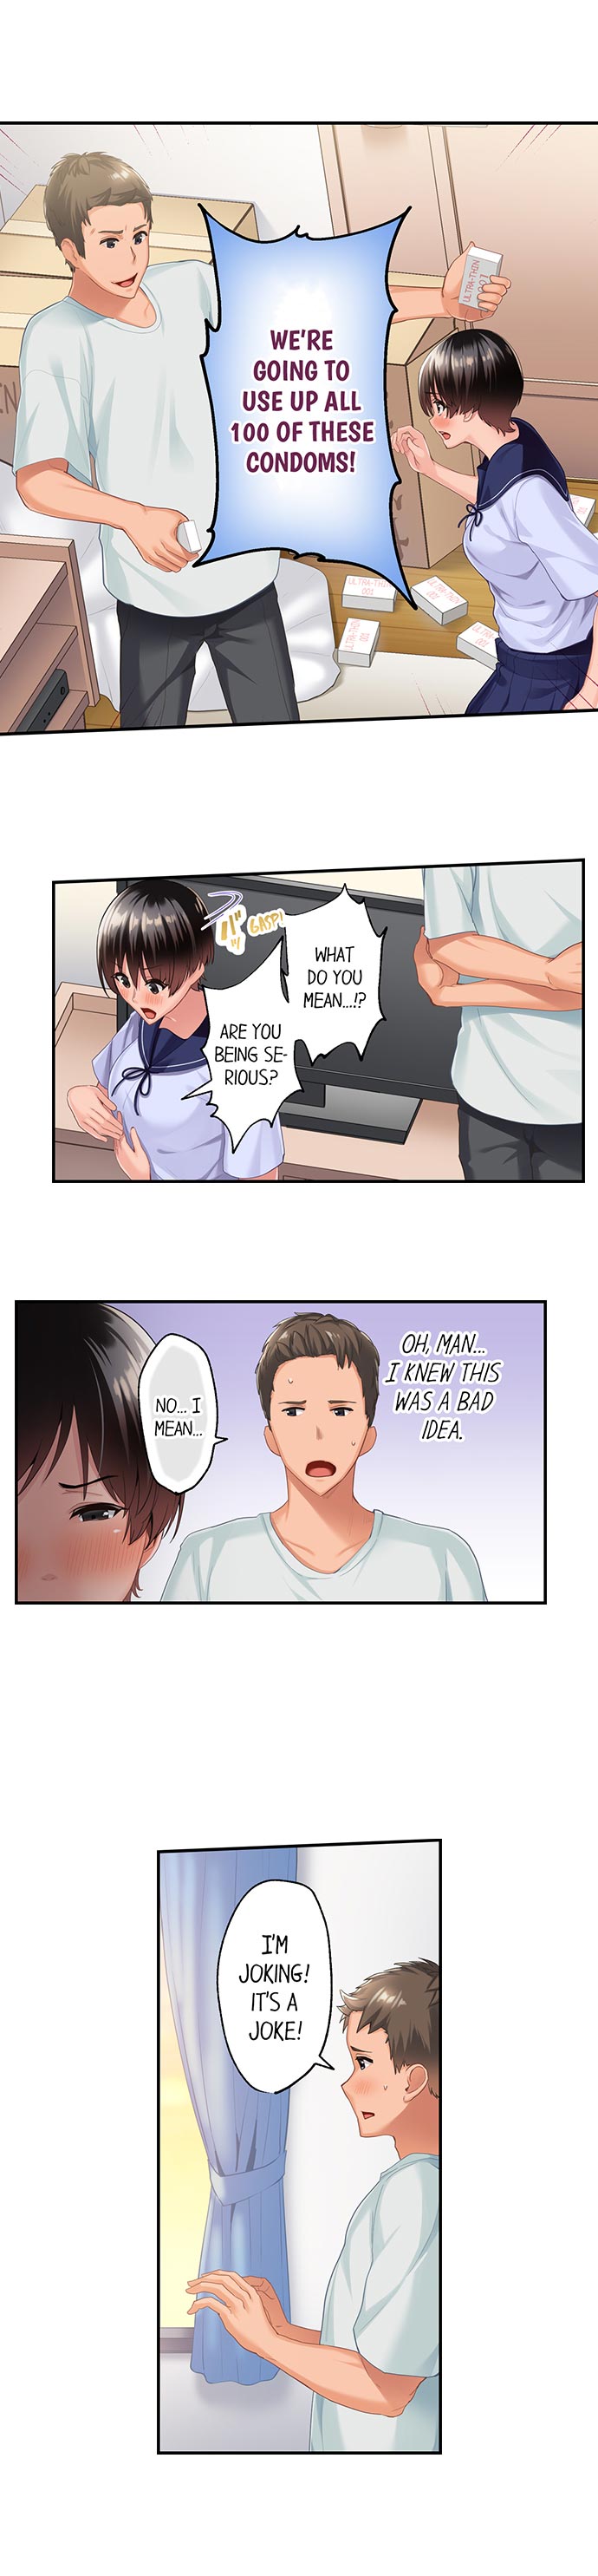 Using 100 Boxes of Condoms With My Childhood Friend! - Chapter 2 Page 4